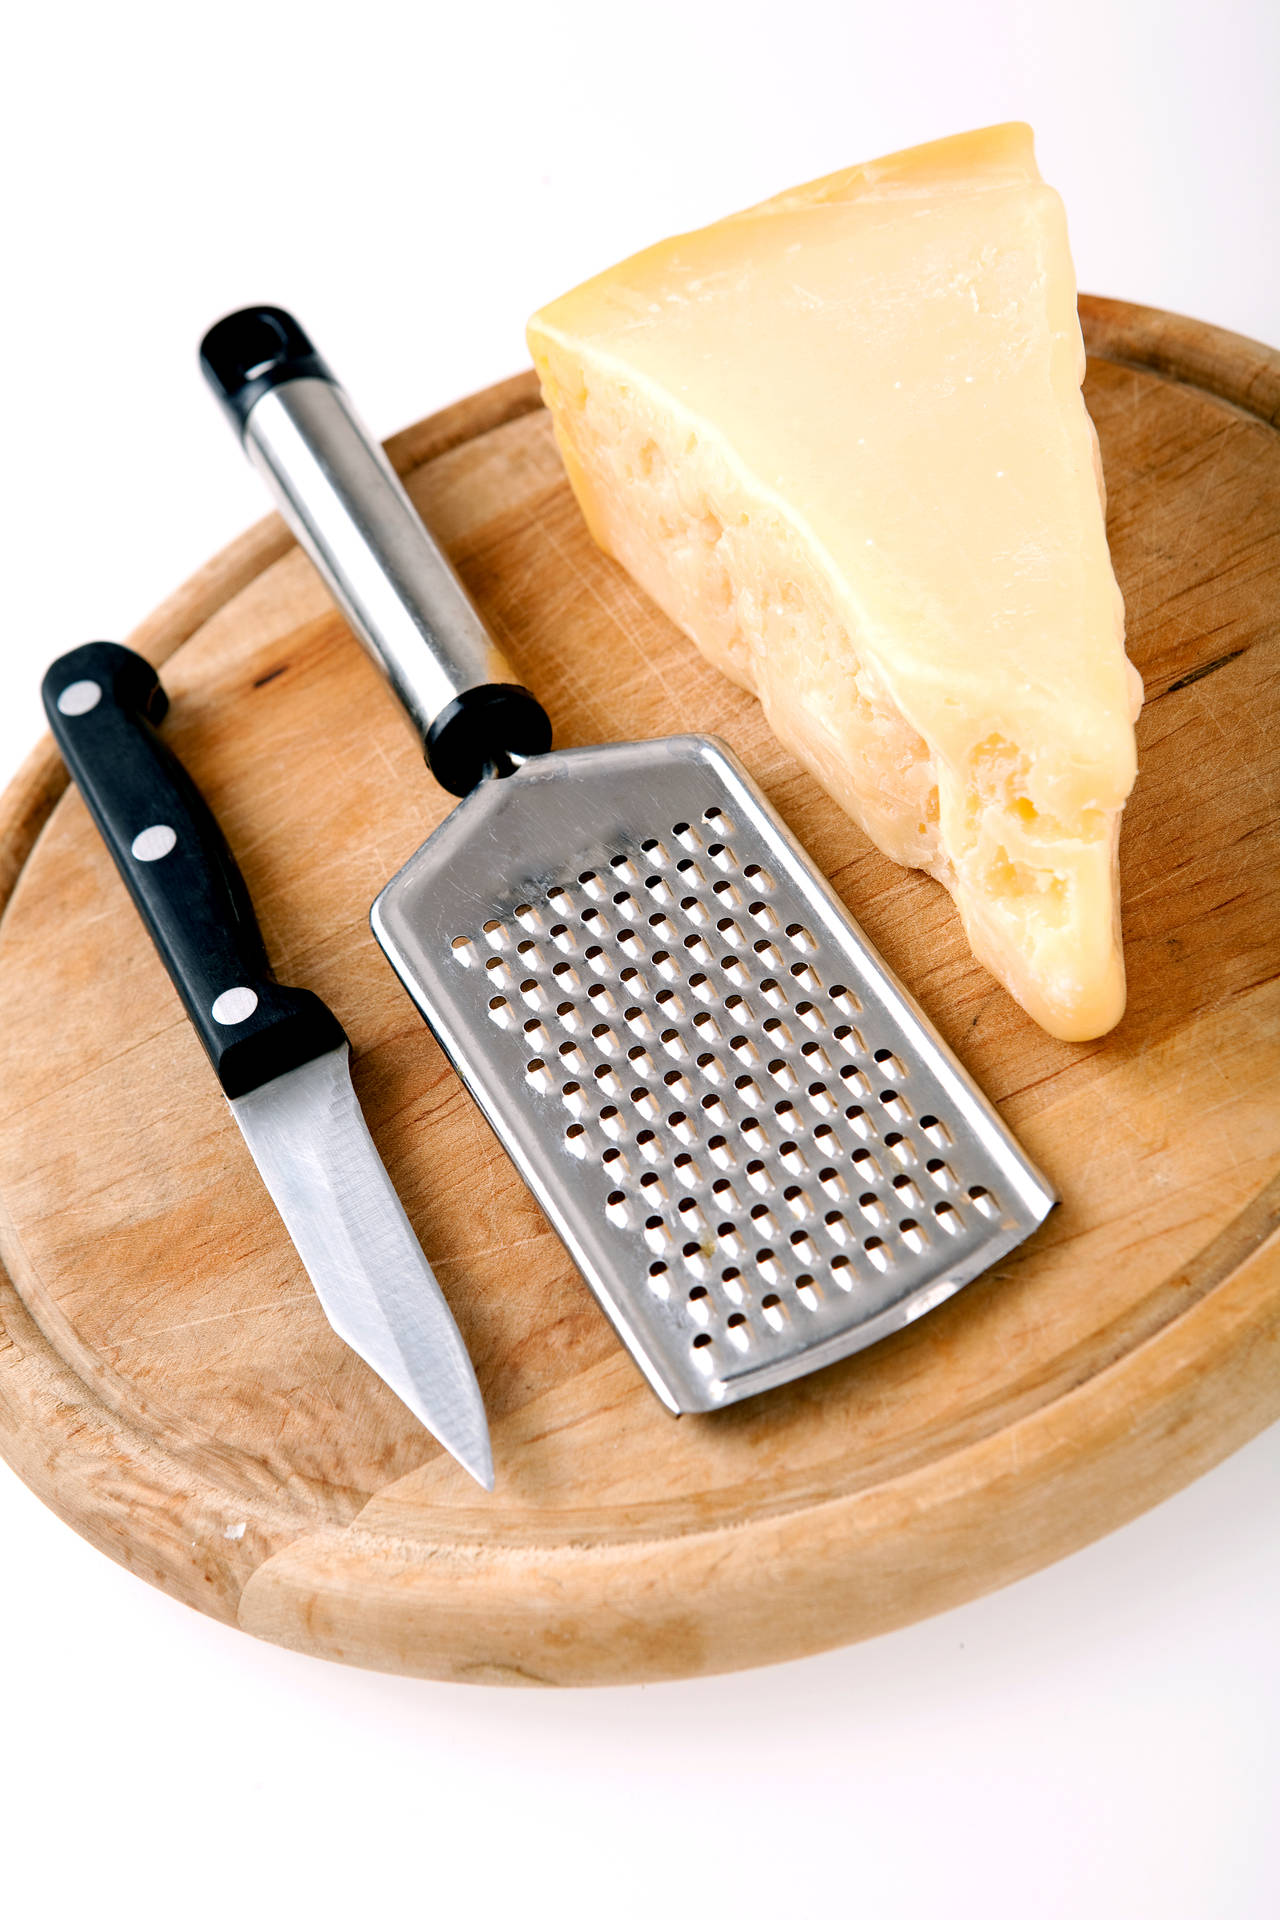 Cheese With Grater And Knife Background